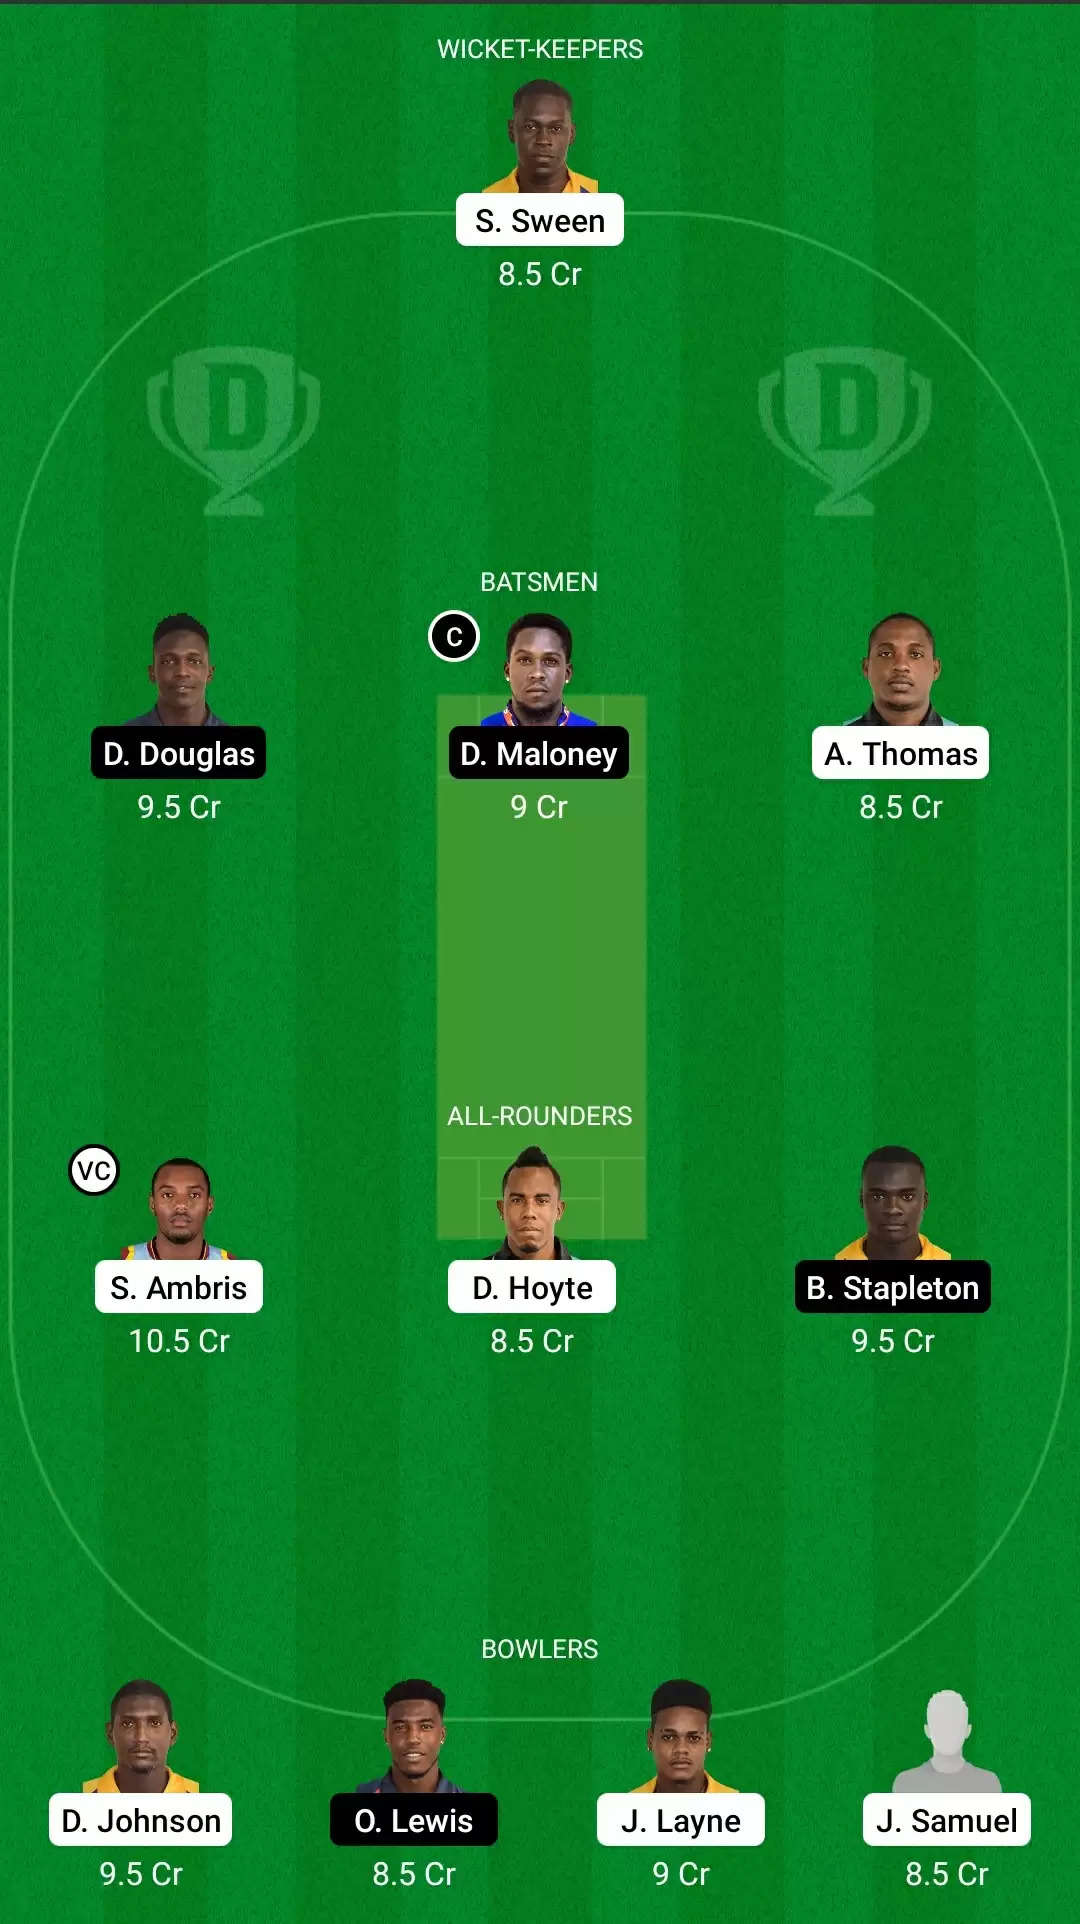 Vincy Premier League 2021, Match 12: SPB vs LSH Dream11 Prediction, Fantasy Cricket Tips, Team, Playing 11, Pitch Report, Weather Conditions and Injury Update